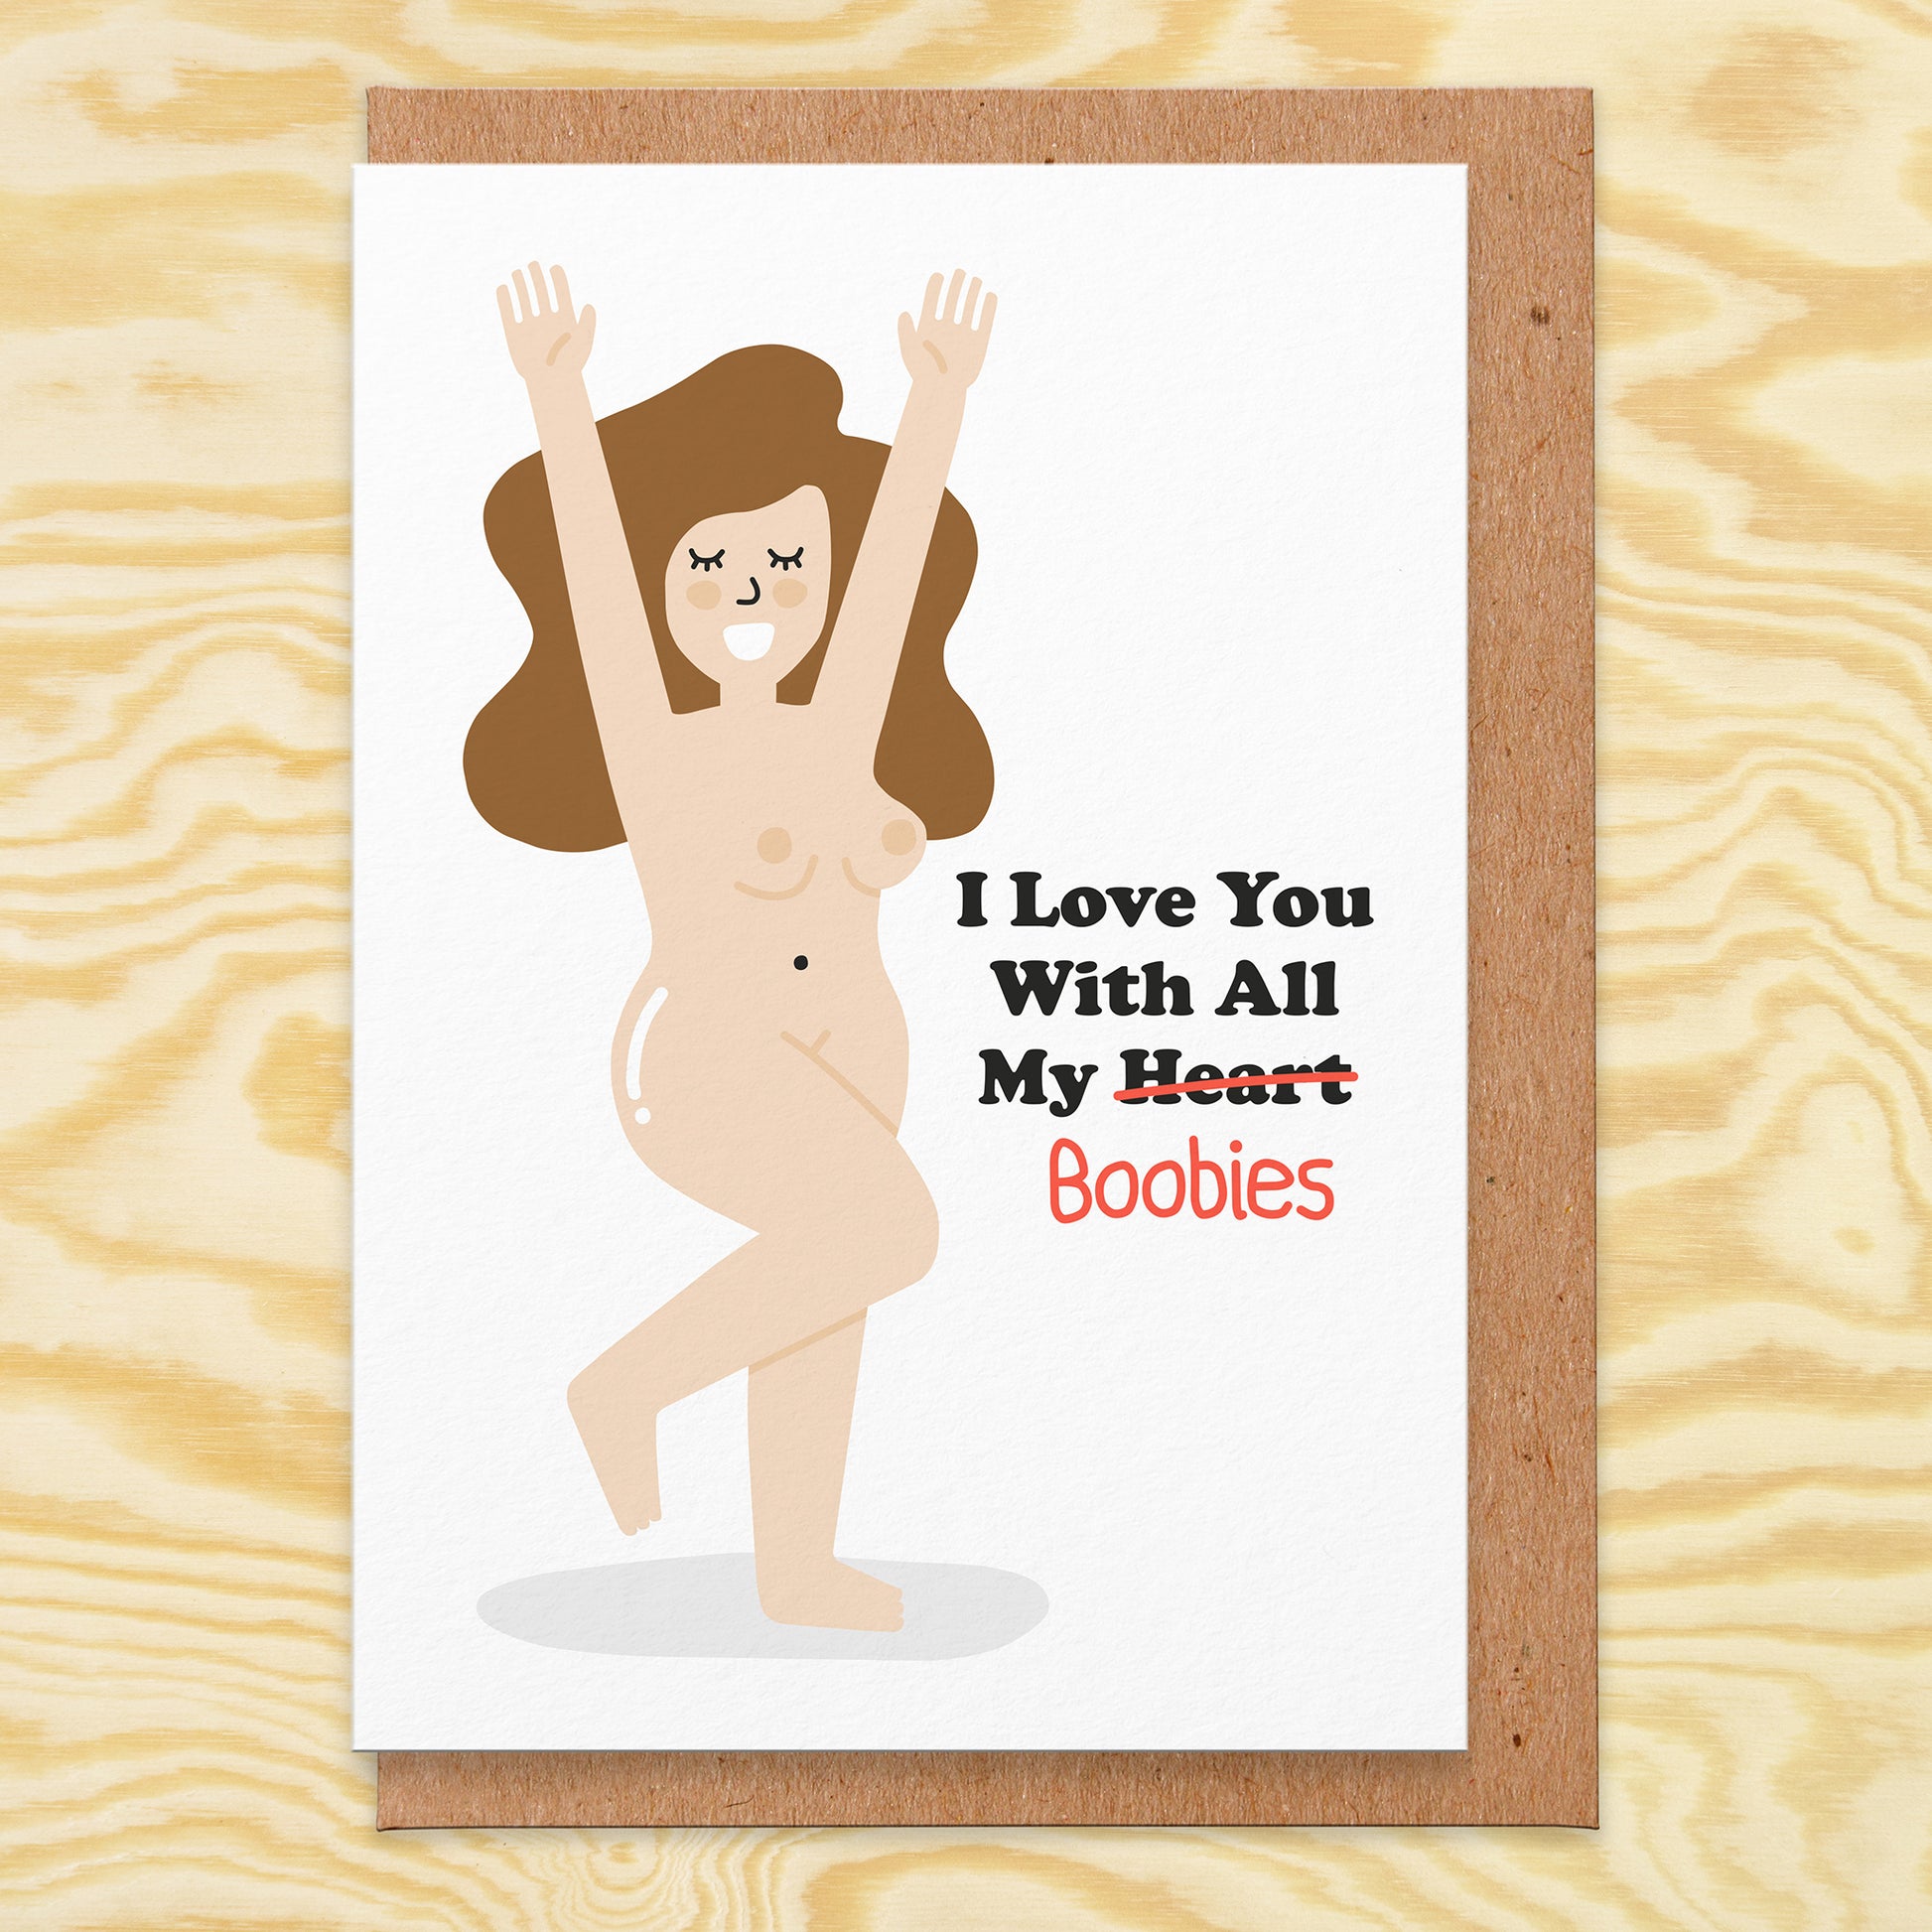 Love card that has an illustration of a naked lady and it reads I love you with all my heart but the heart is crossed out and it says boobies.